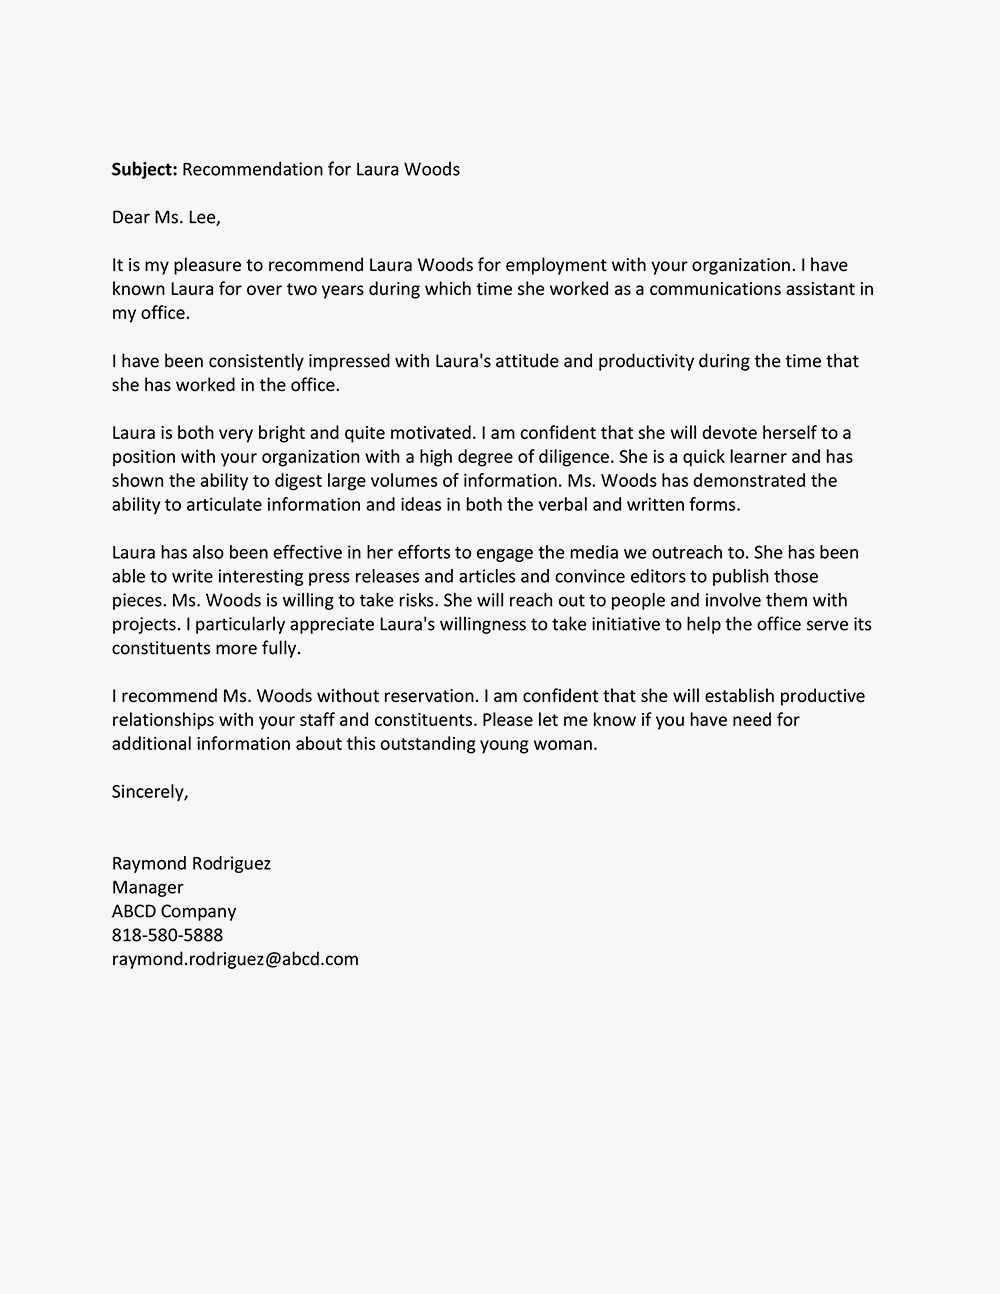 Recommendation Letter For Employee From Manager Debandje throughout sizing 1000 X 1294